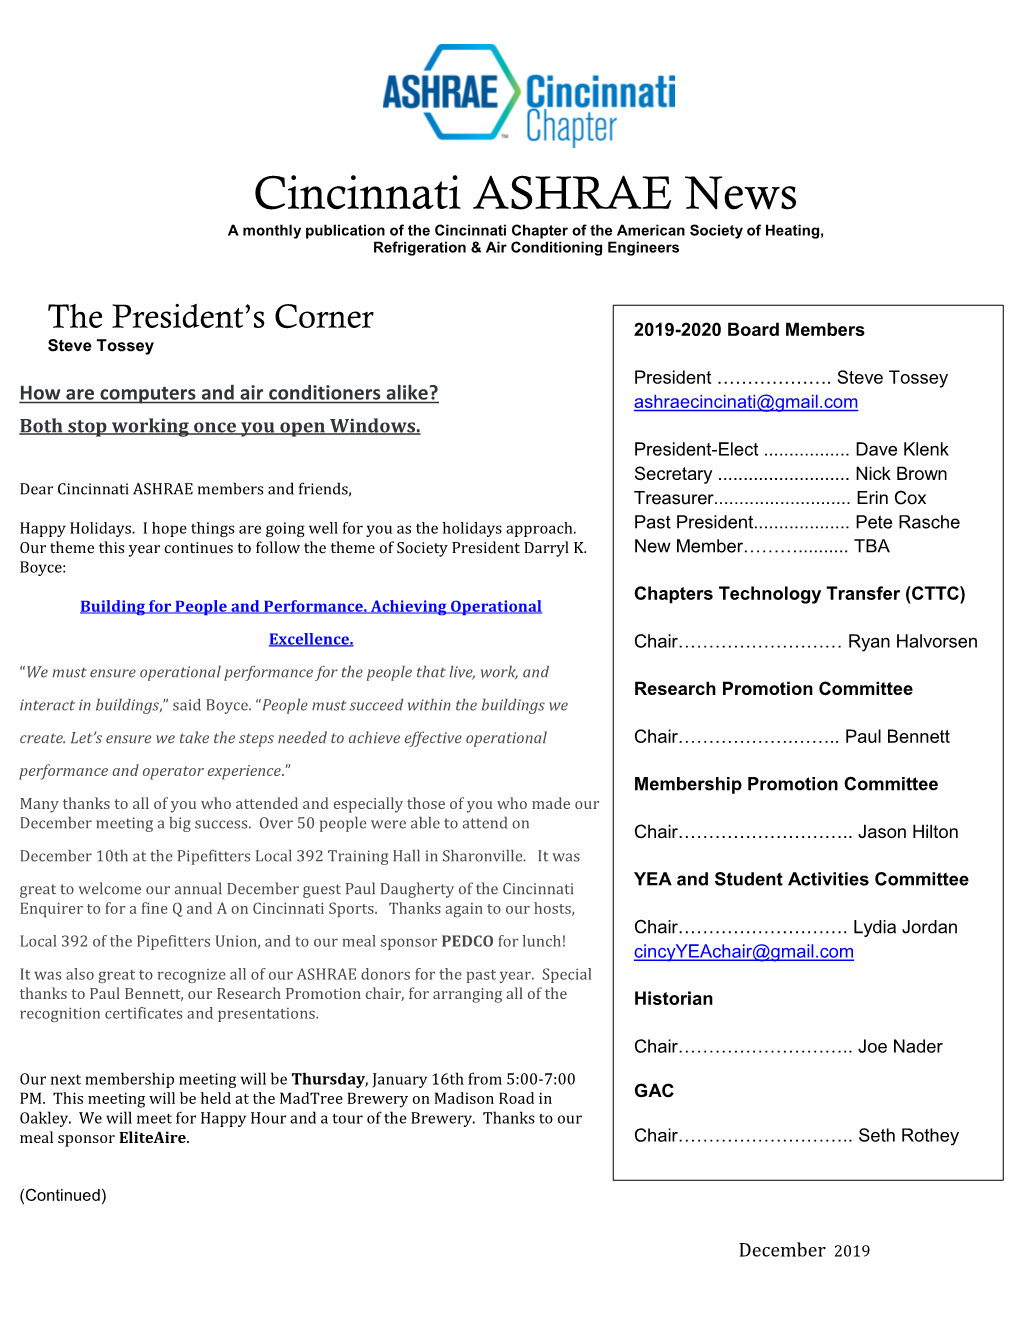 Cincinnati ASHRAE News a Monthly Publication of the Cincinnati Chapter of the American Society of Heating, Refrigeration & Air Conditioning Engineers